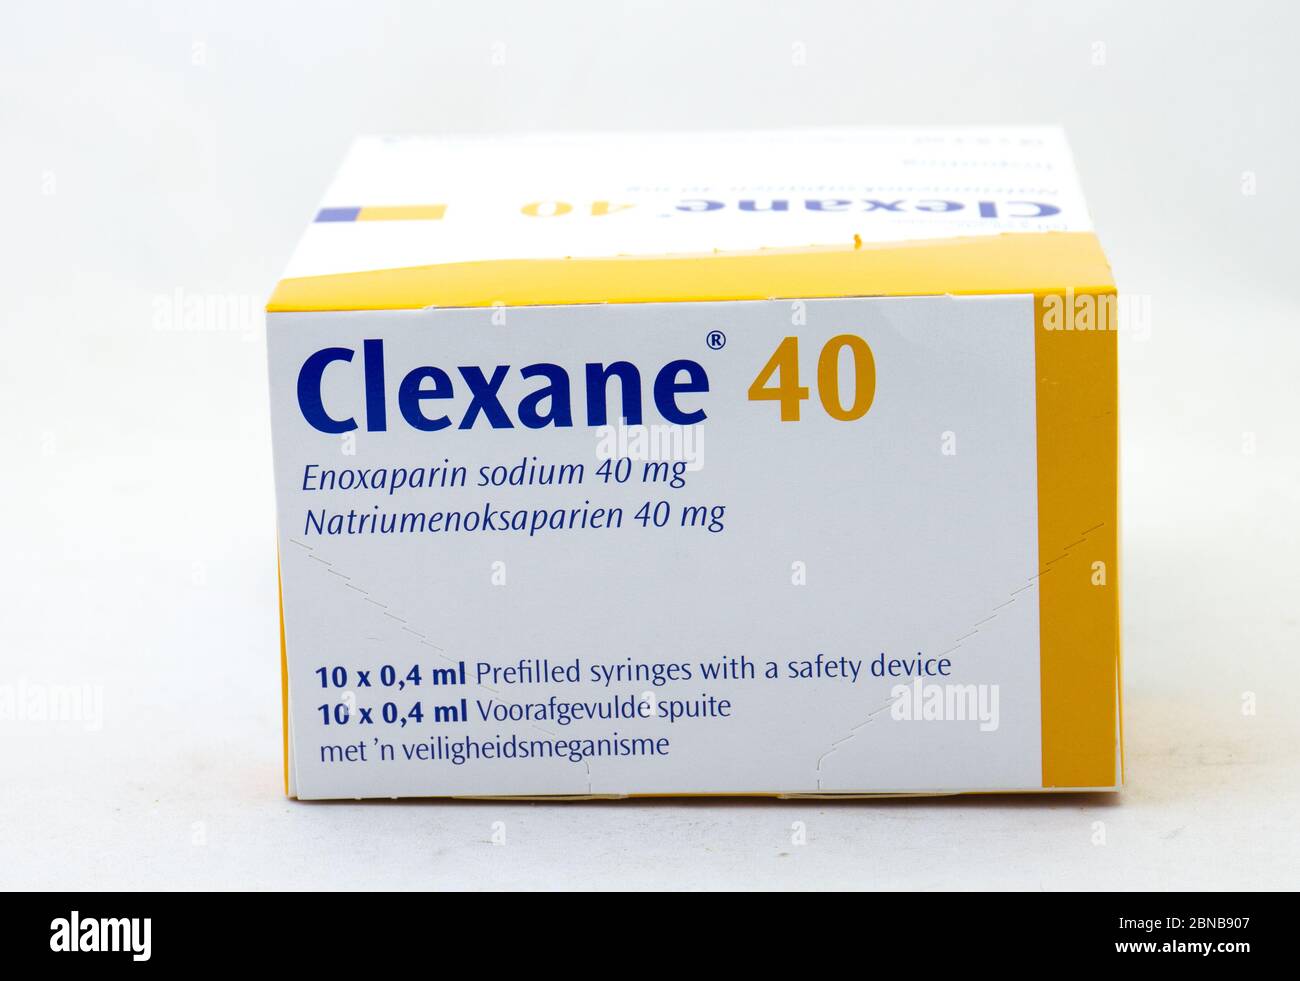 Alberton, South Africa - a box of 10 Clexane 40 prefilled syringes with  safety device isolated on a clear background image with copy space Stock  Photo - Alamy